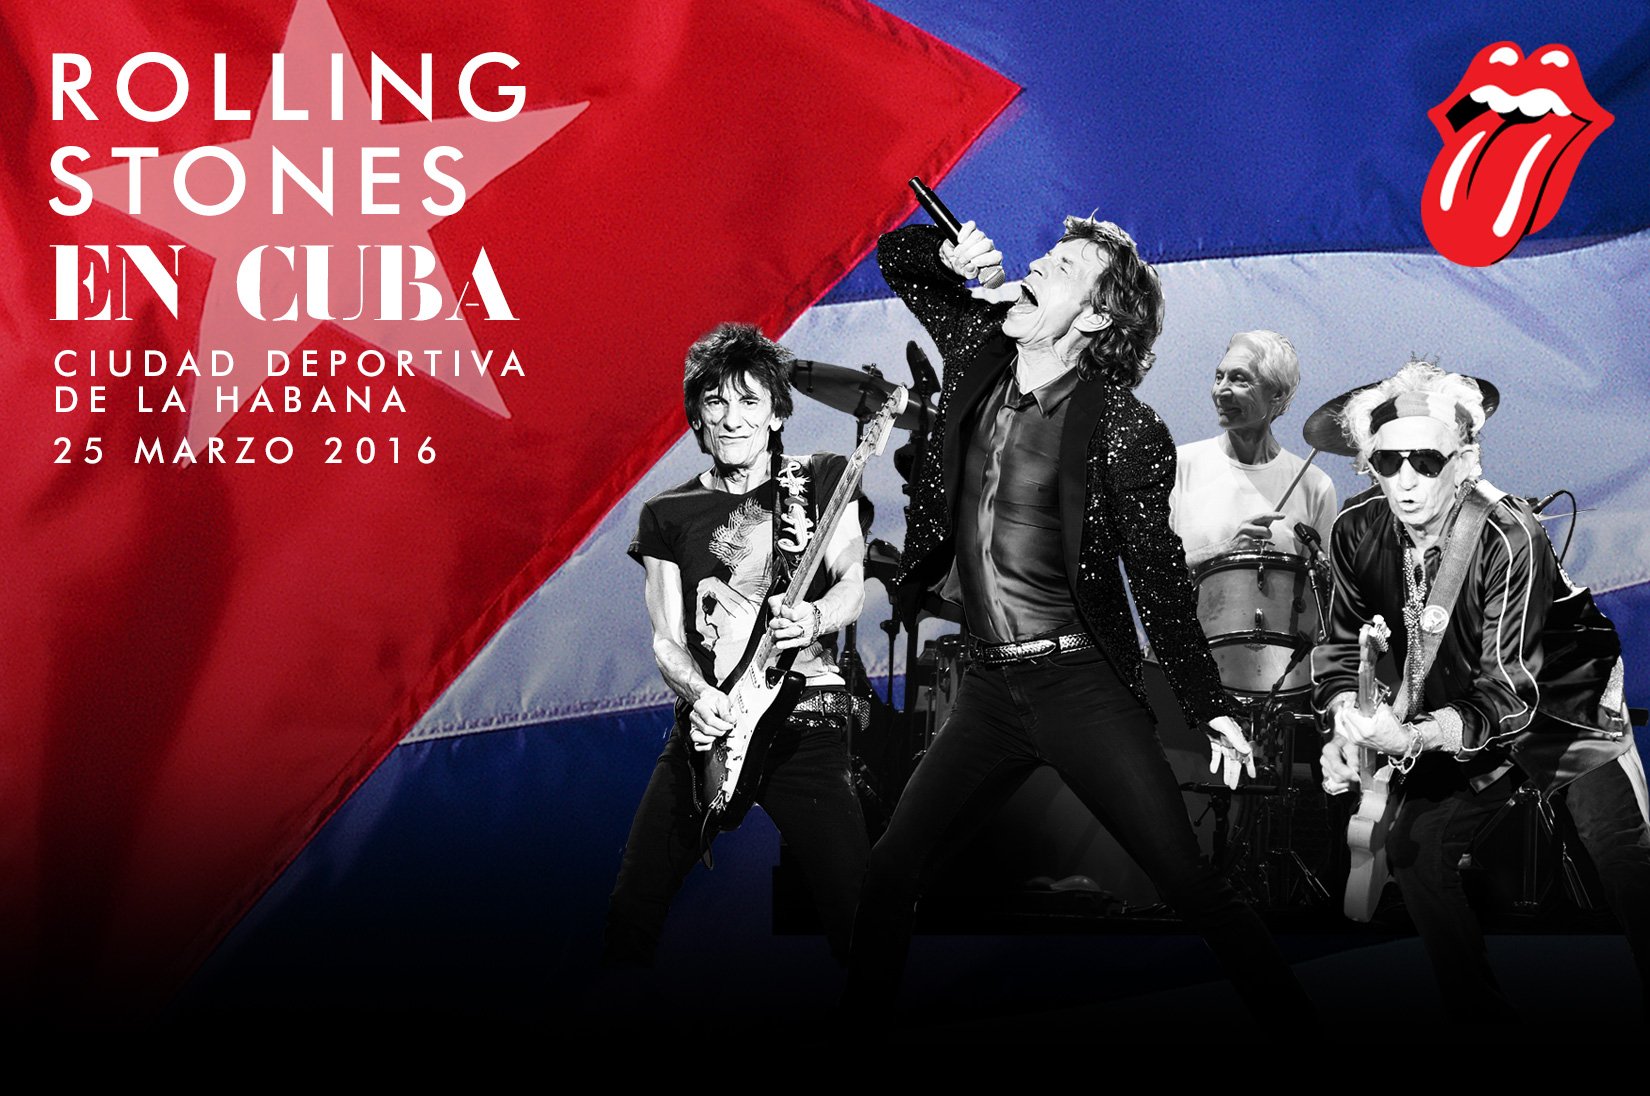 The Rolling Stones on Twitter: Rolling Stones announce concert in #StonesCuba https://t.co/Xdl4DW9lnH https://t.co/olRCAc2XbX" / Twitter